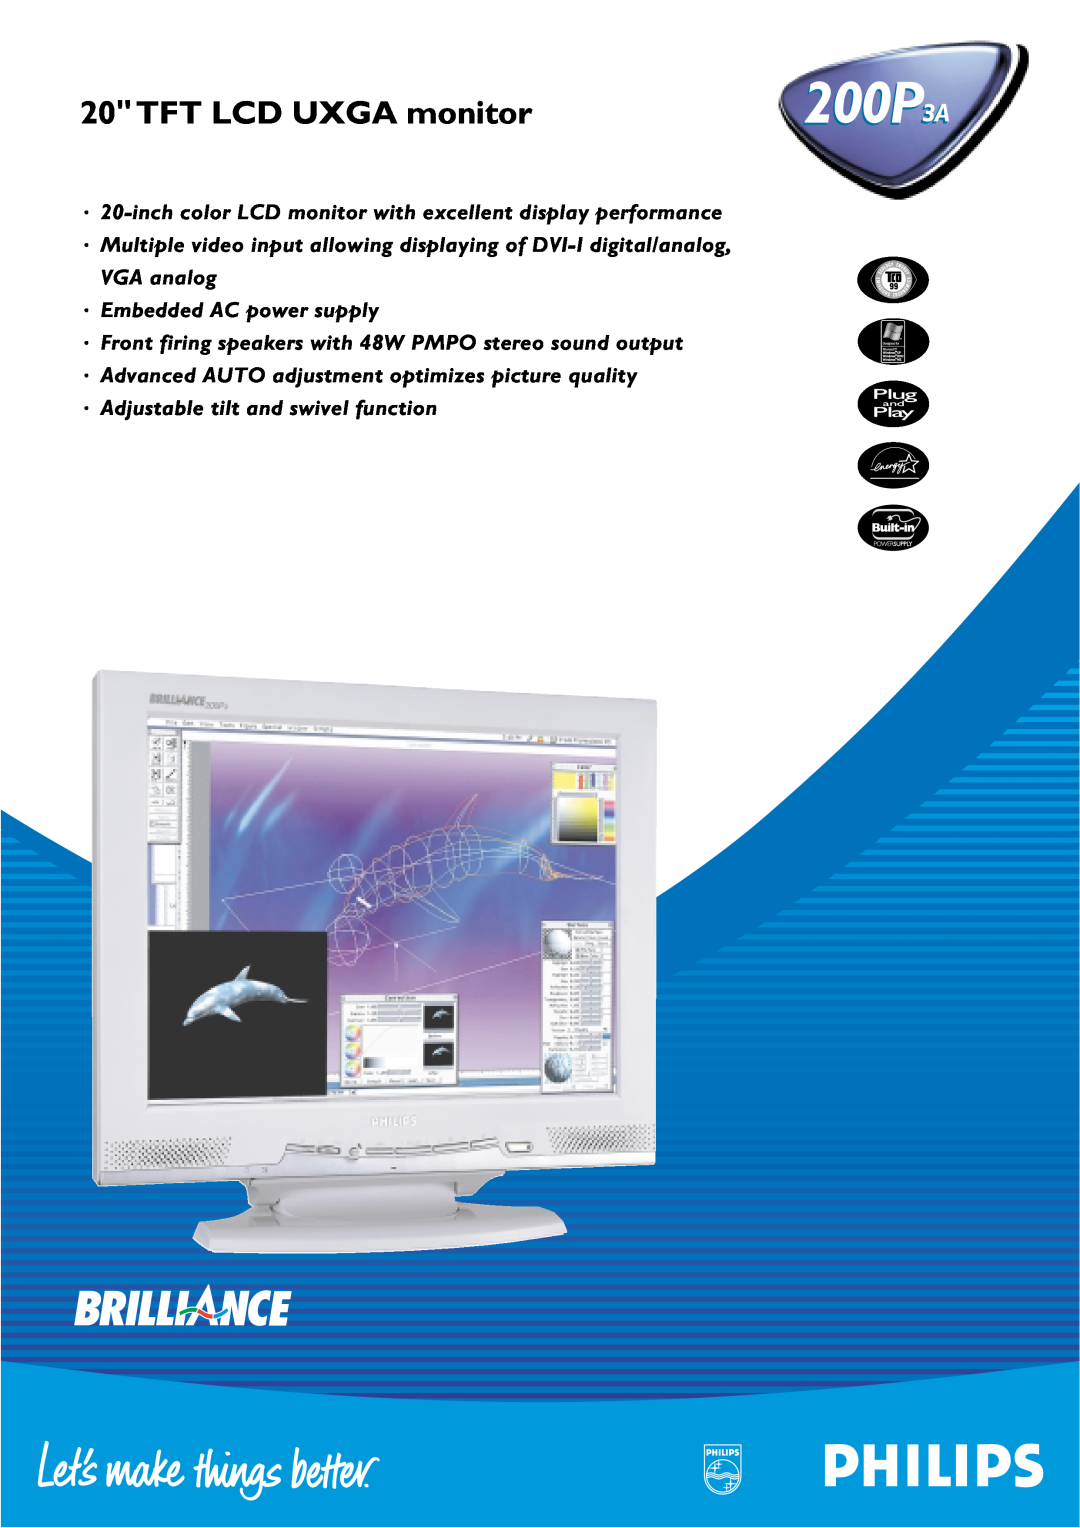 Philips 200P3A manual TFT LCD UXGA monitor, Embedded AC power supply, Adjustable tilt and swivel function 